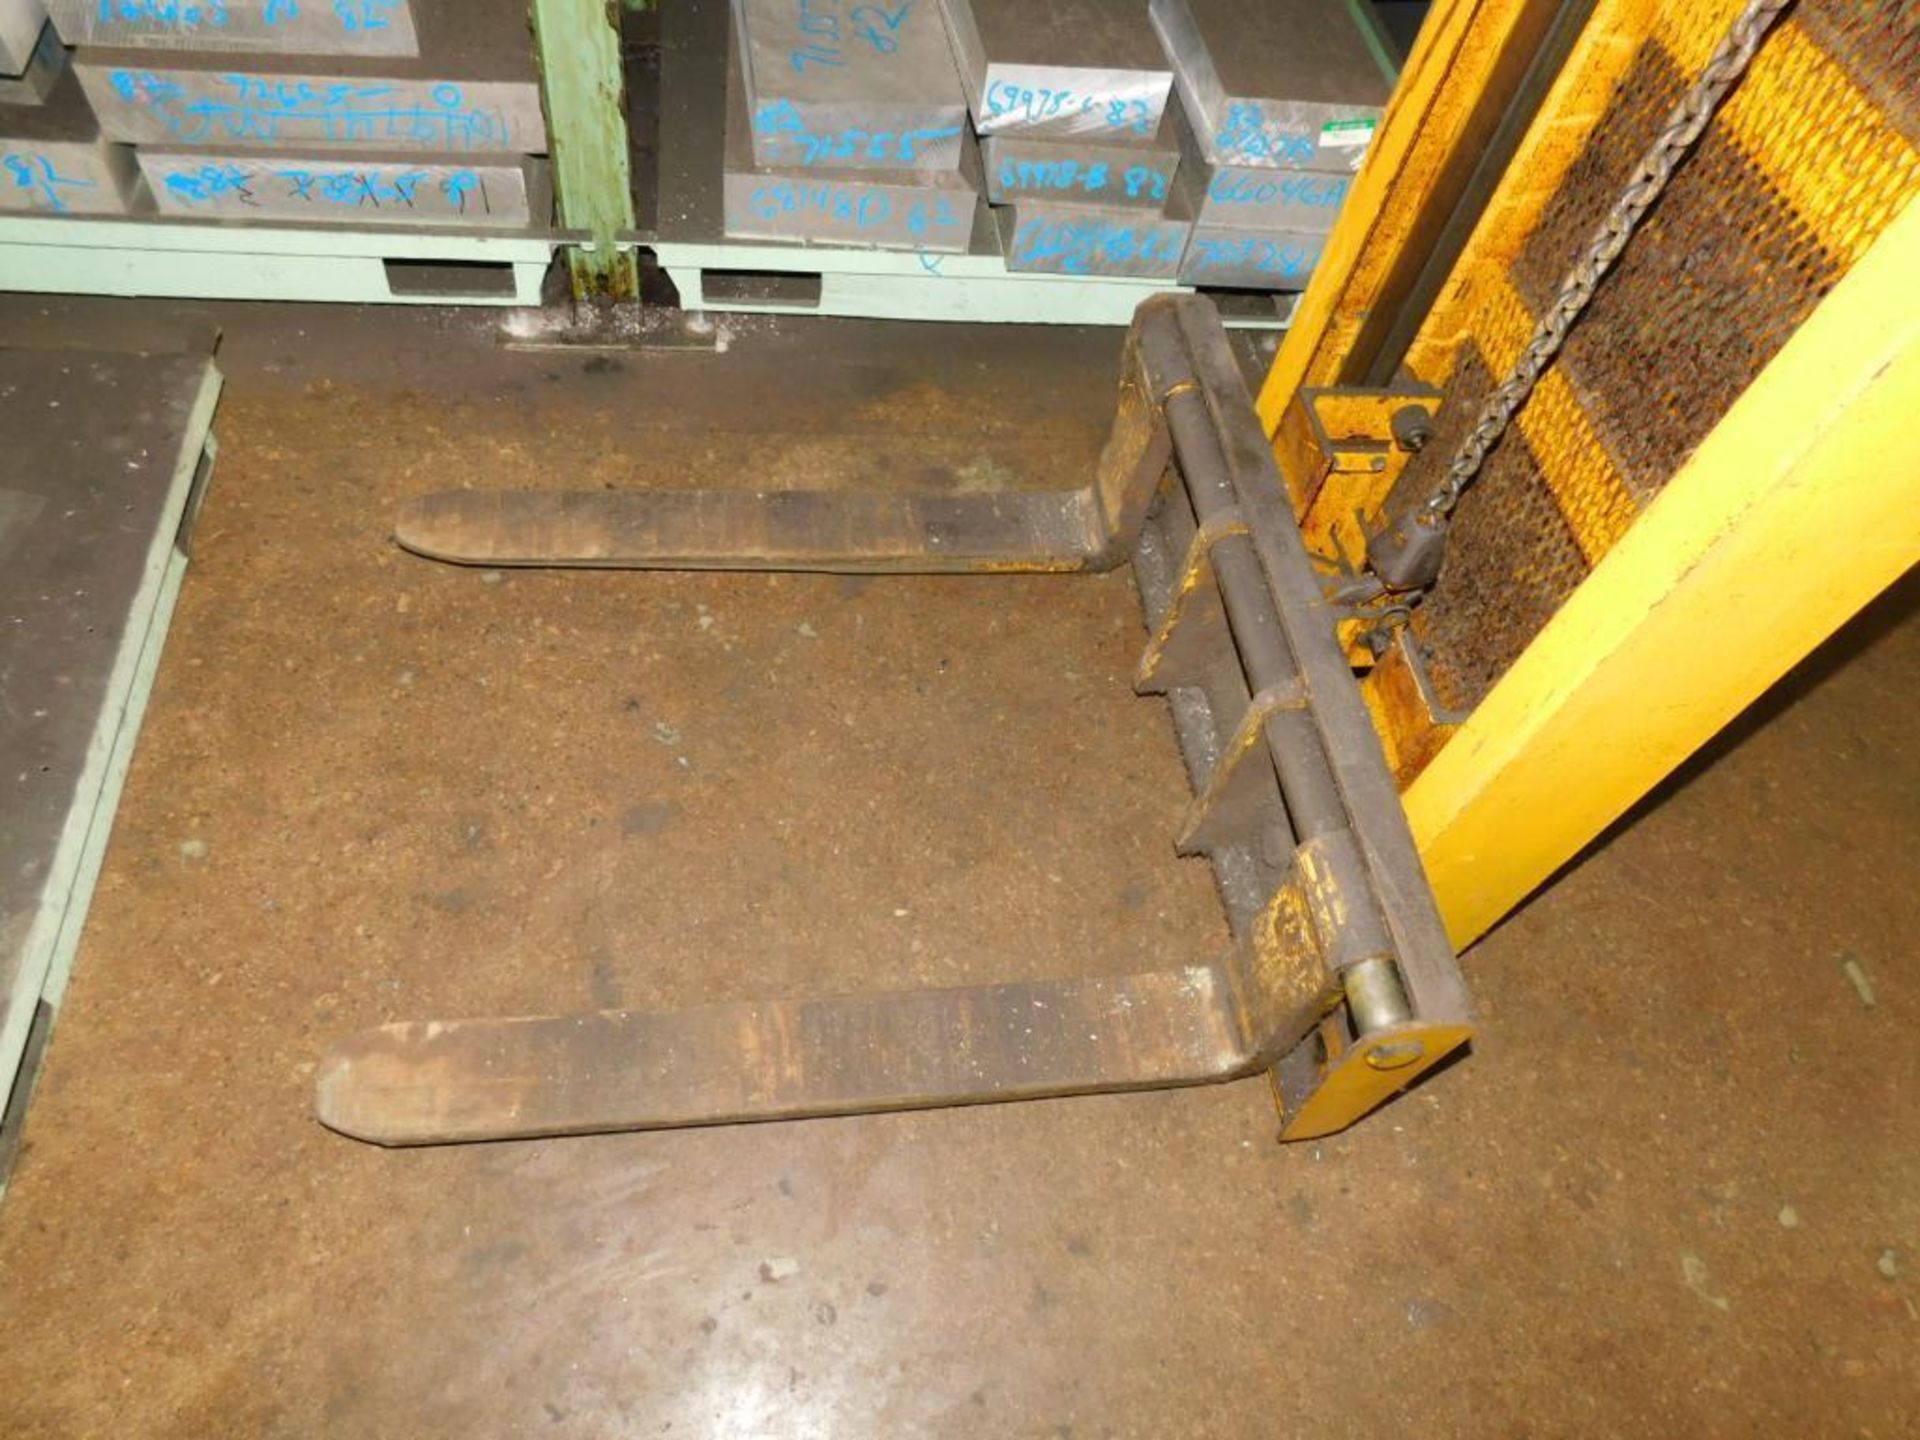 LOT: Vidmar Stak System Heavy Duty Steel Racking with Integrated Picker, 1-Ton Capacity (DELAYED REM - Image 8 of 15